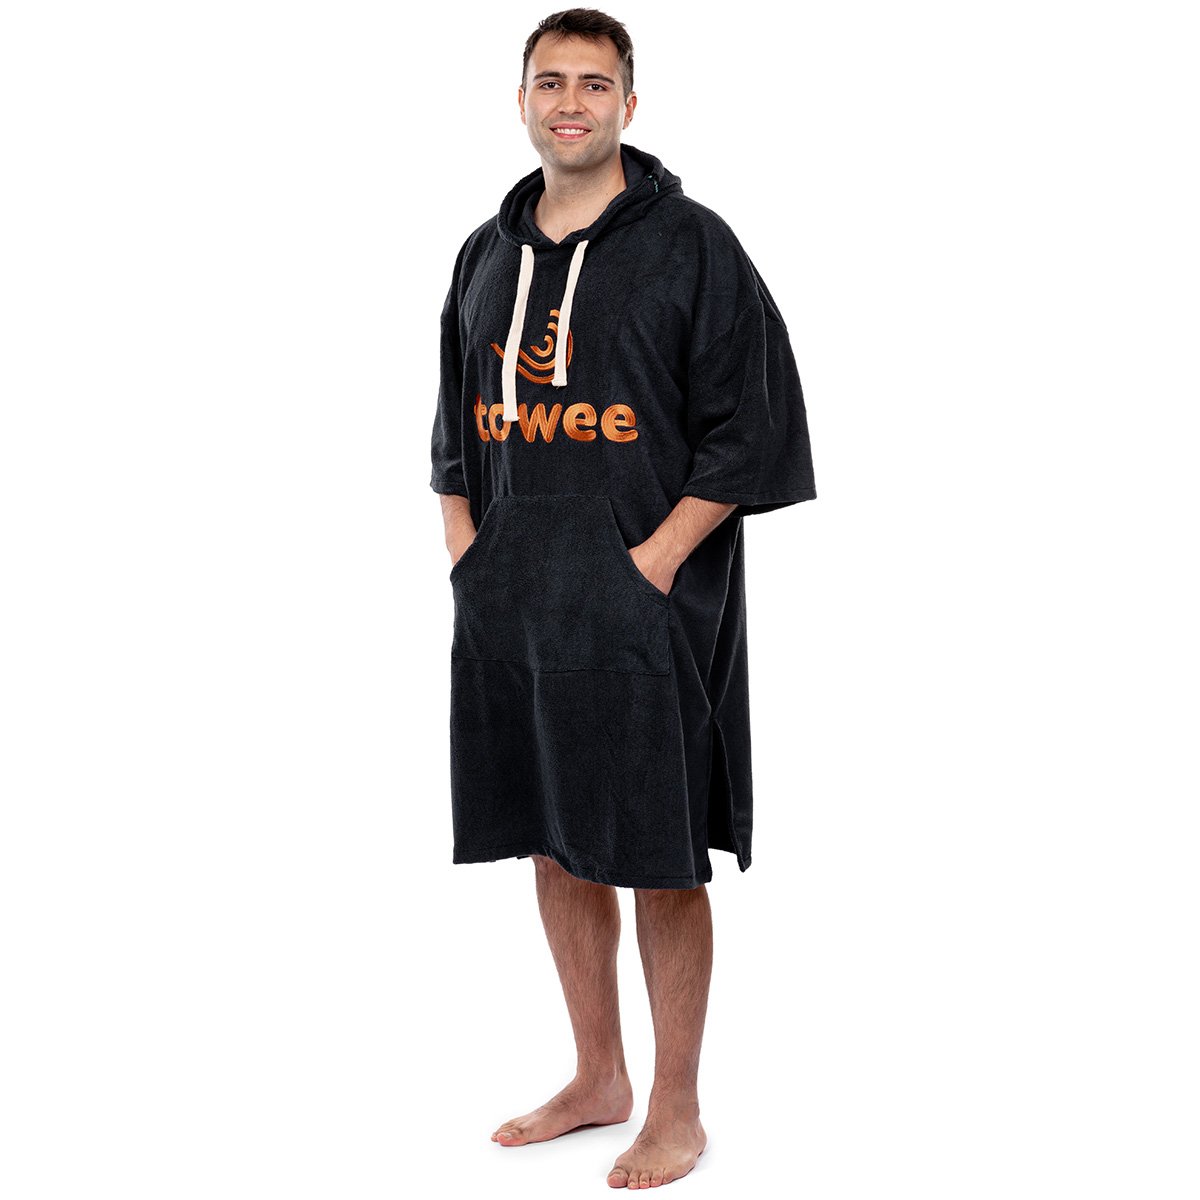 Surf poncho Towee anhtracite with orange embroidery, 80 x 115 cm